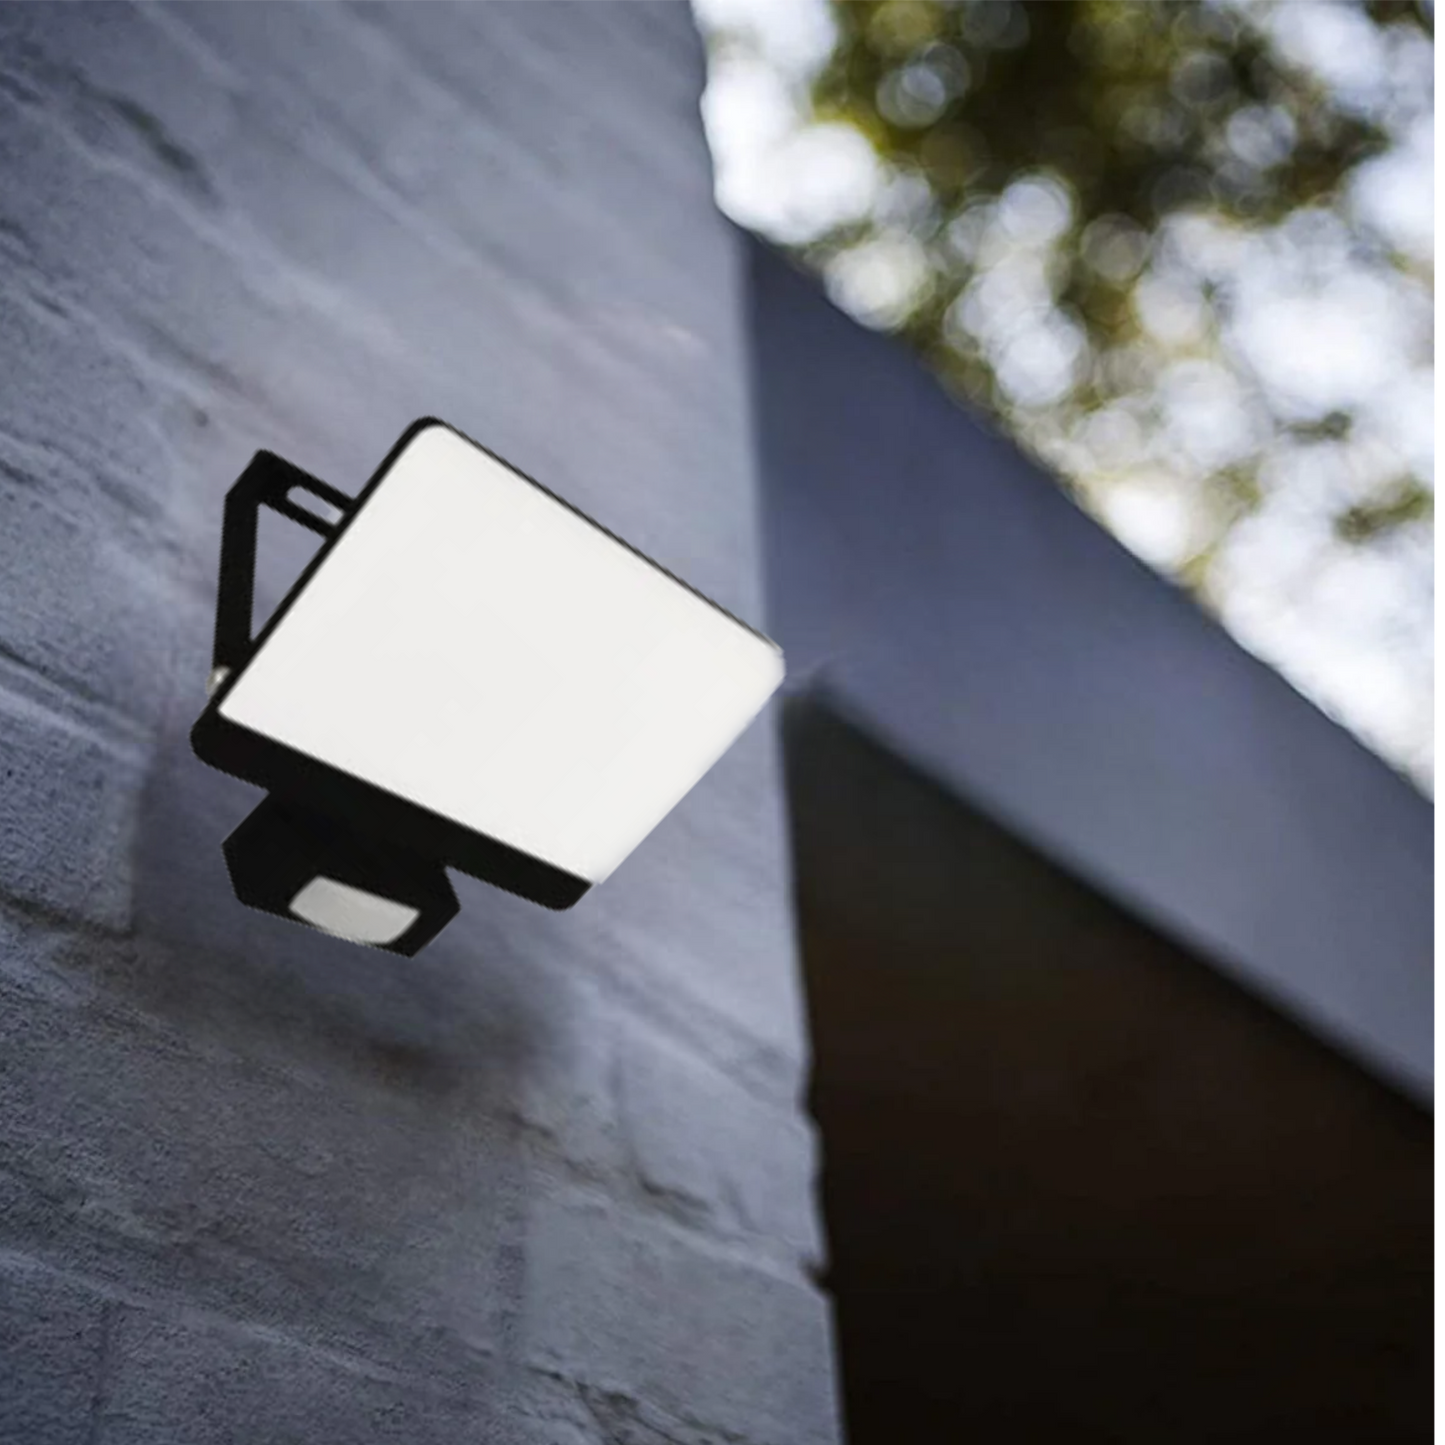 Our Parry LED outdoor wall light with built in PIR motion sensor is a highly efficient light source.  This flood light is a stylish outdoor solution for your home. It has a solid aluminium construction and a polycarbonate cover. The easily adjustable design of this outdoor flood light allows it to be used functionally for lighting paths and aesthetically decorate the walls of your home with a beautiful, bright glow